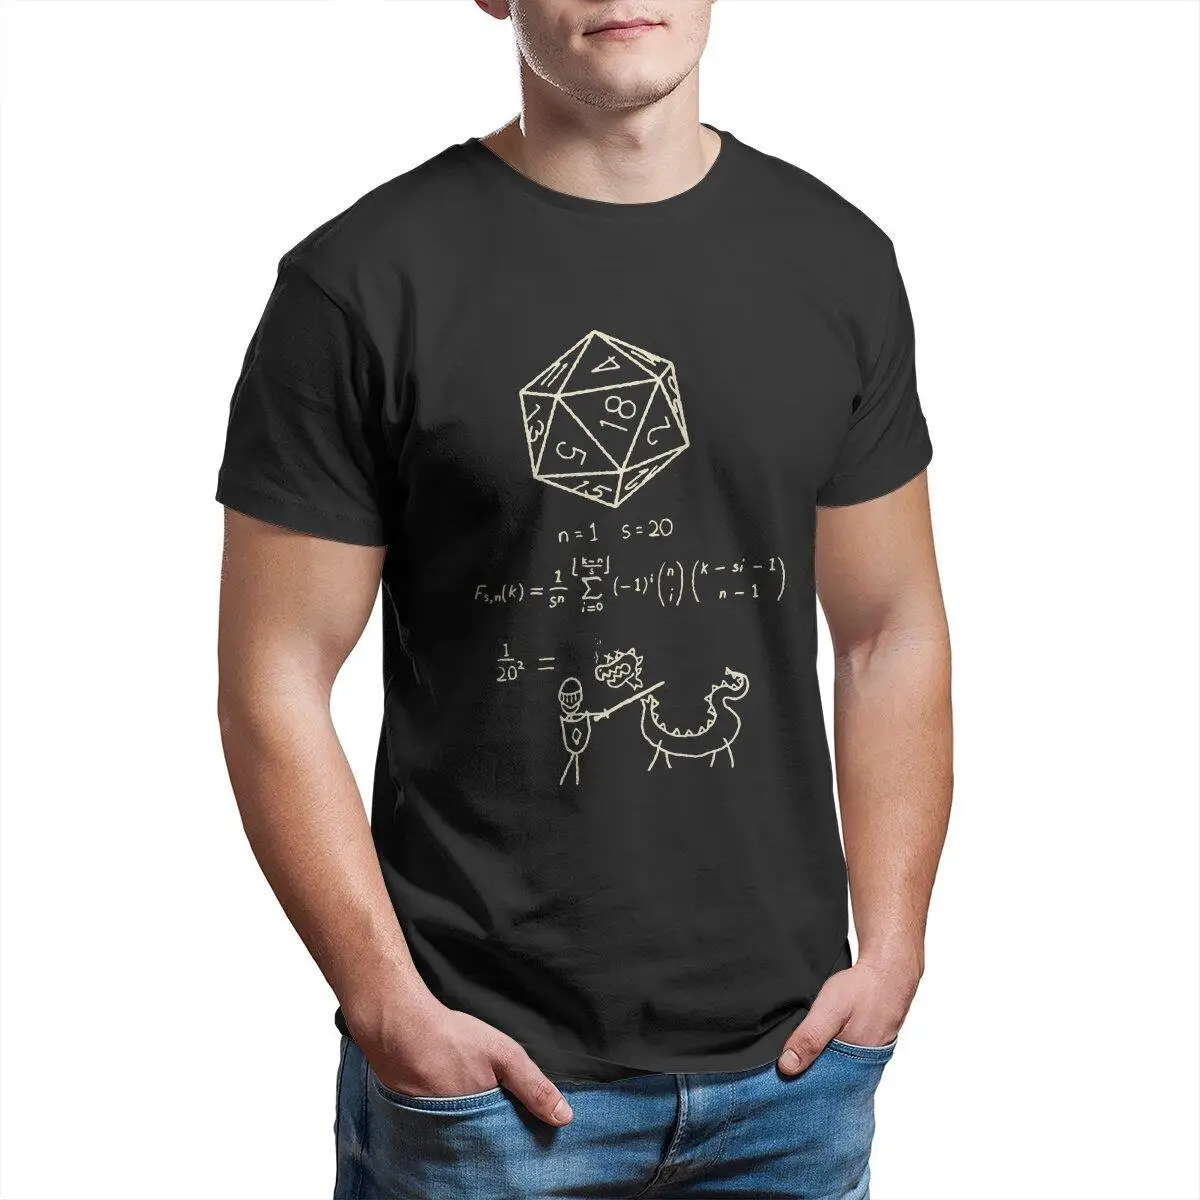 

Men's T-Shirt The Science Of 20 Sided Dice Novelty Cotton Tee Shirt Short Sleeve Chemistry Math T Shirt Clothes Birthday Present